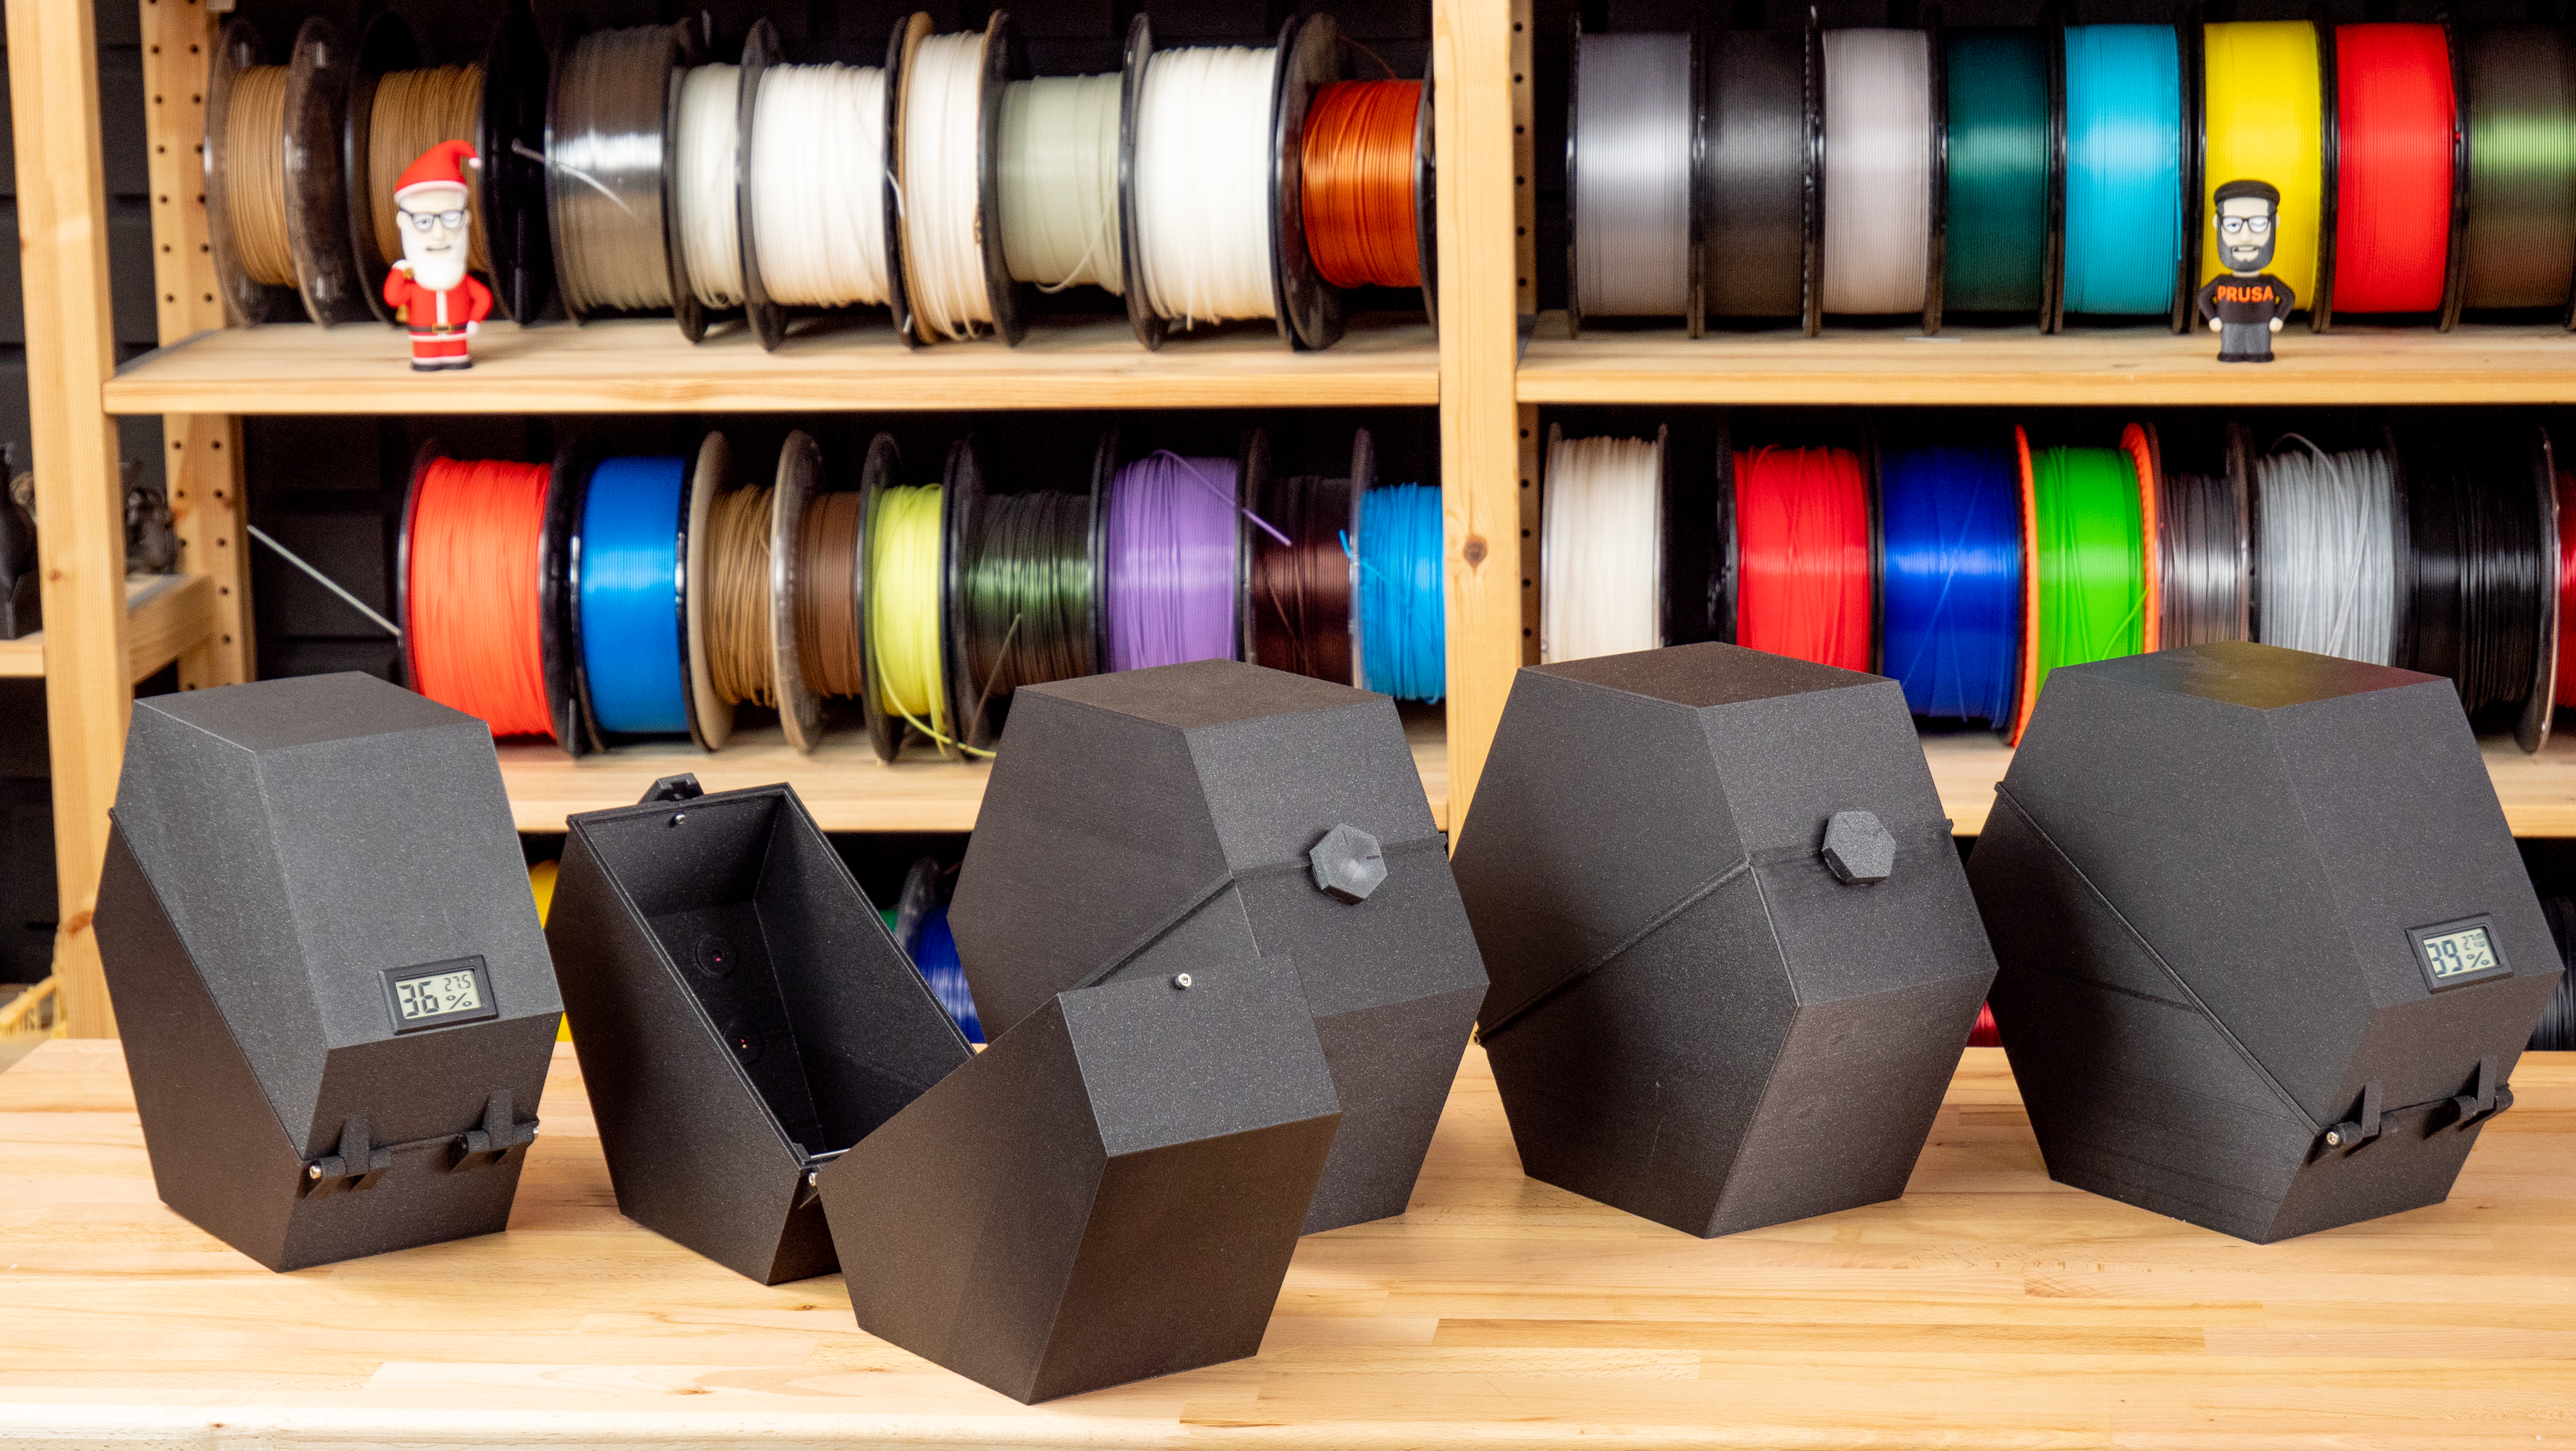 3D Printer Filament Storage Dry Box - Print Directly from the Box